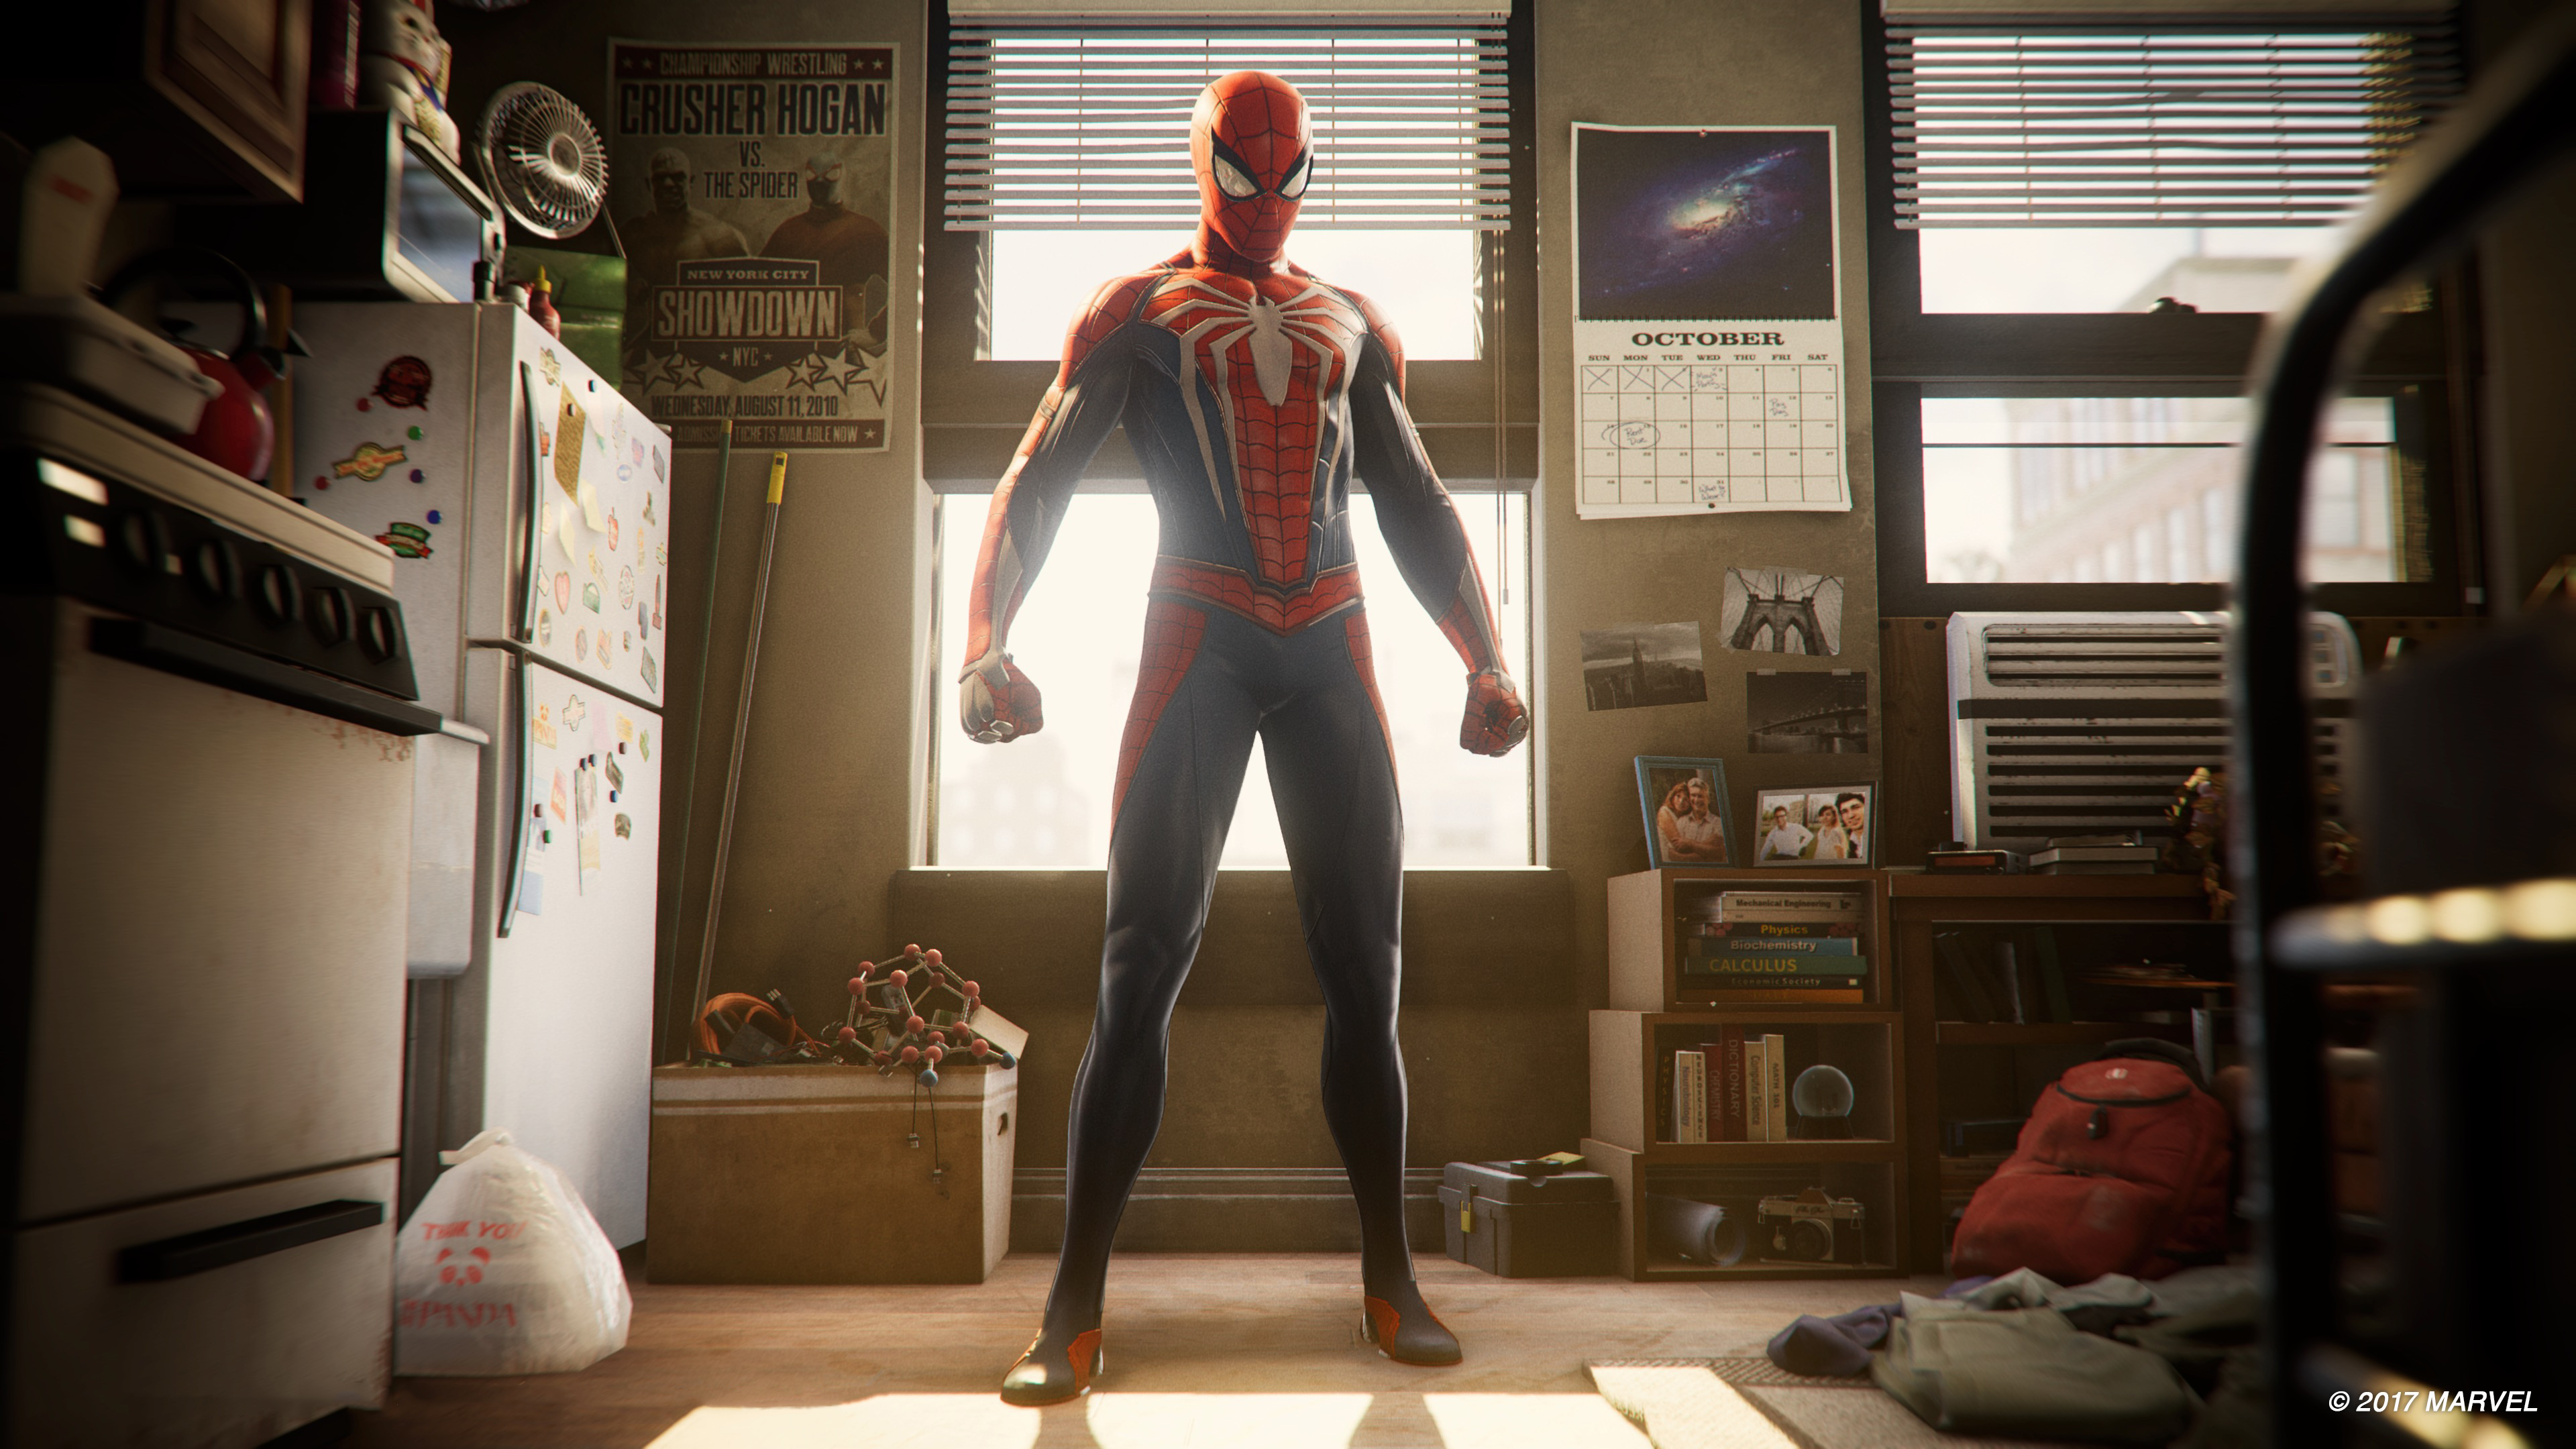 spider man, spider man (ps4), video game, aunt may parker, harry osborn, mary jane watson, peter parker wallpapers for tablet